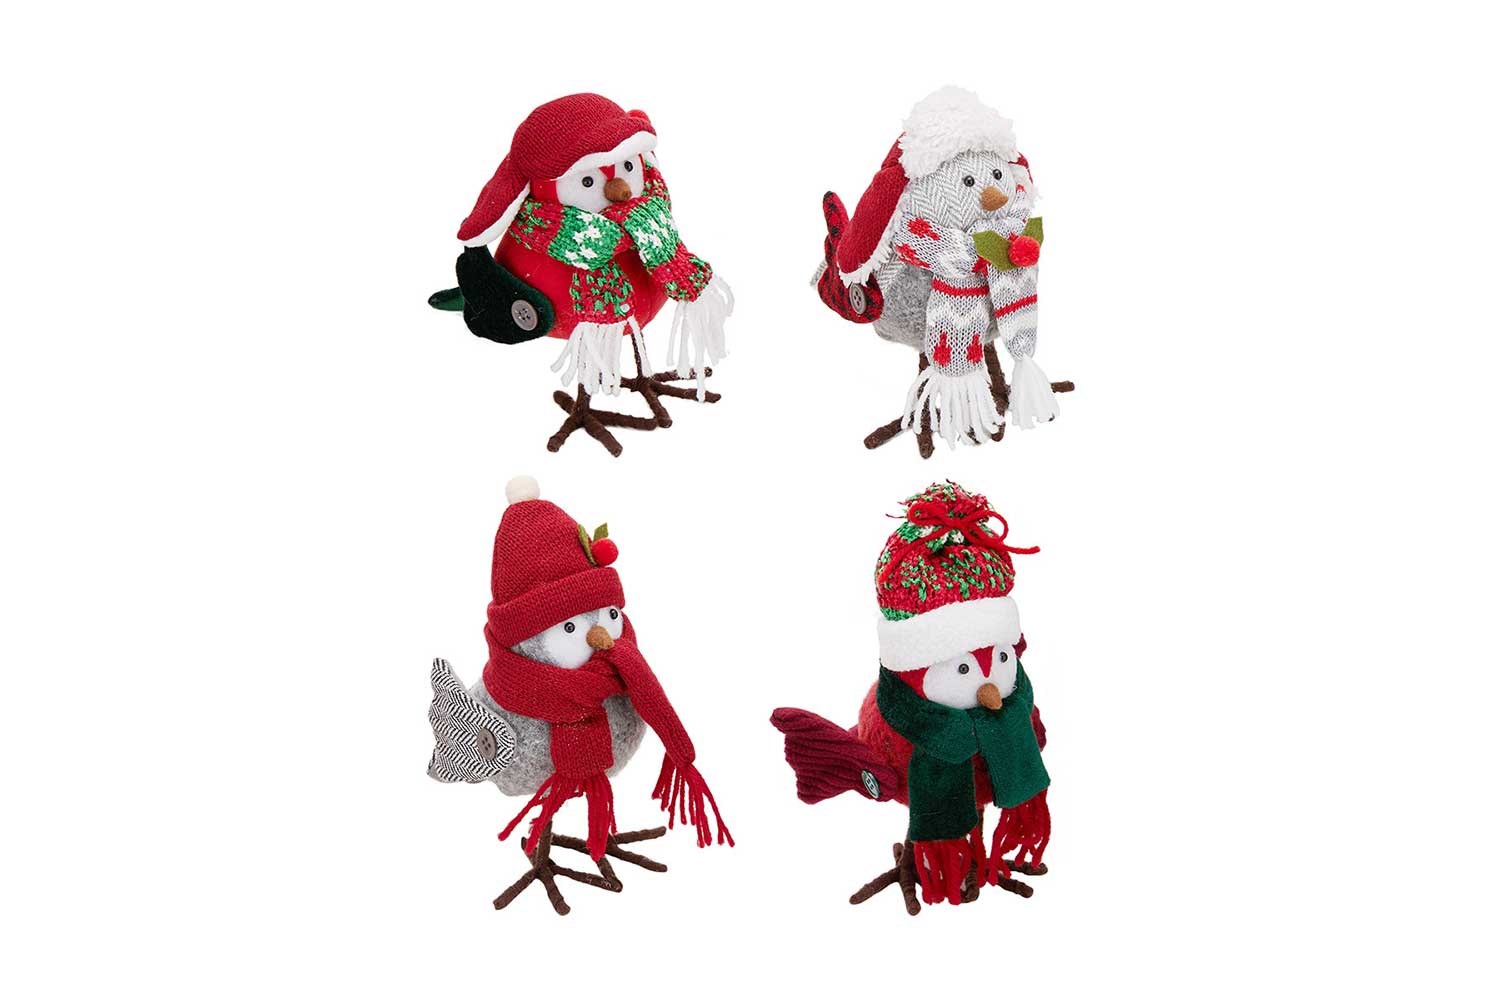 Shop christmas decorations at kmart for the perfect holiday look